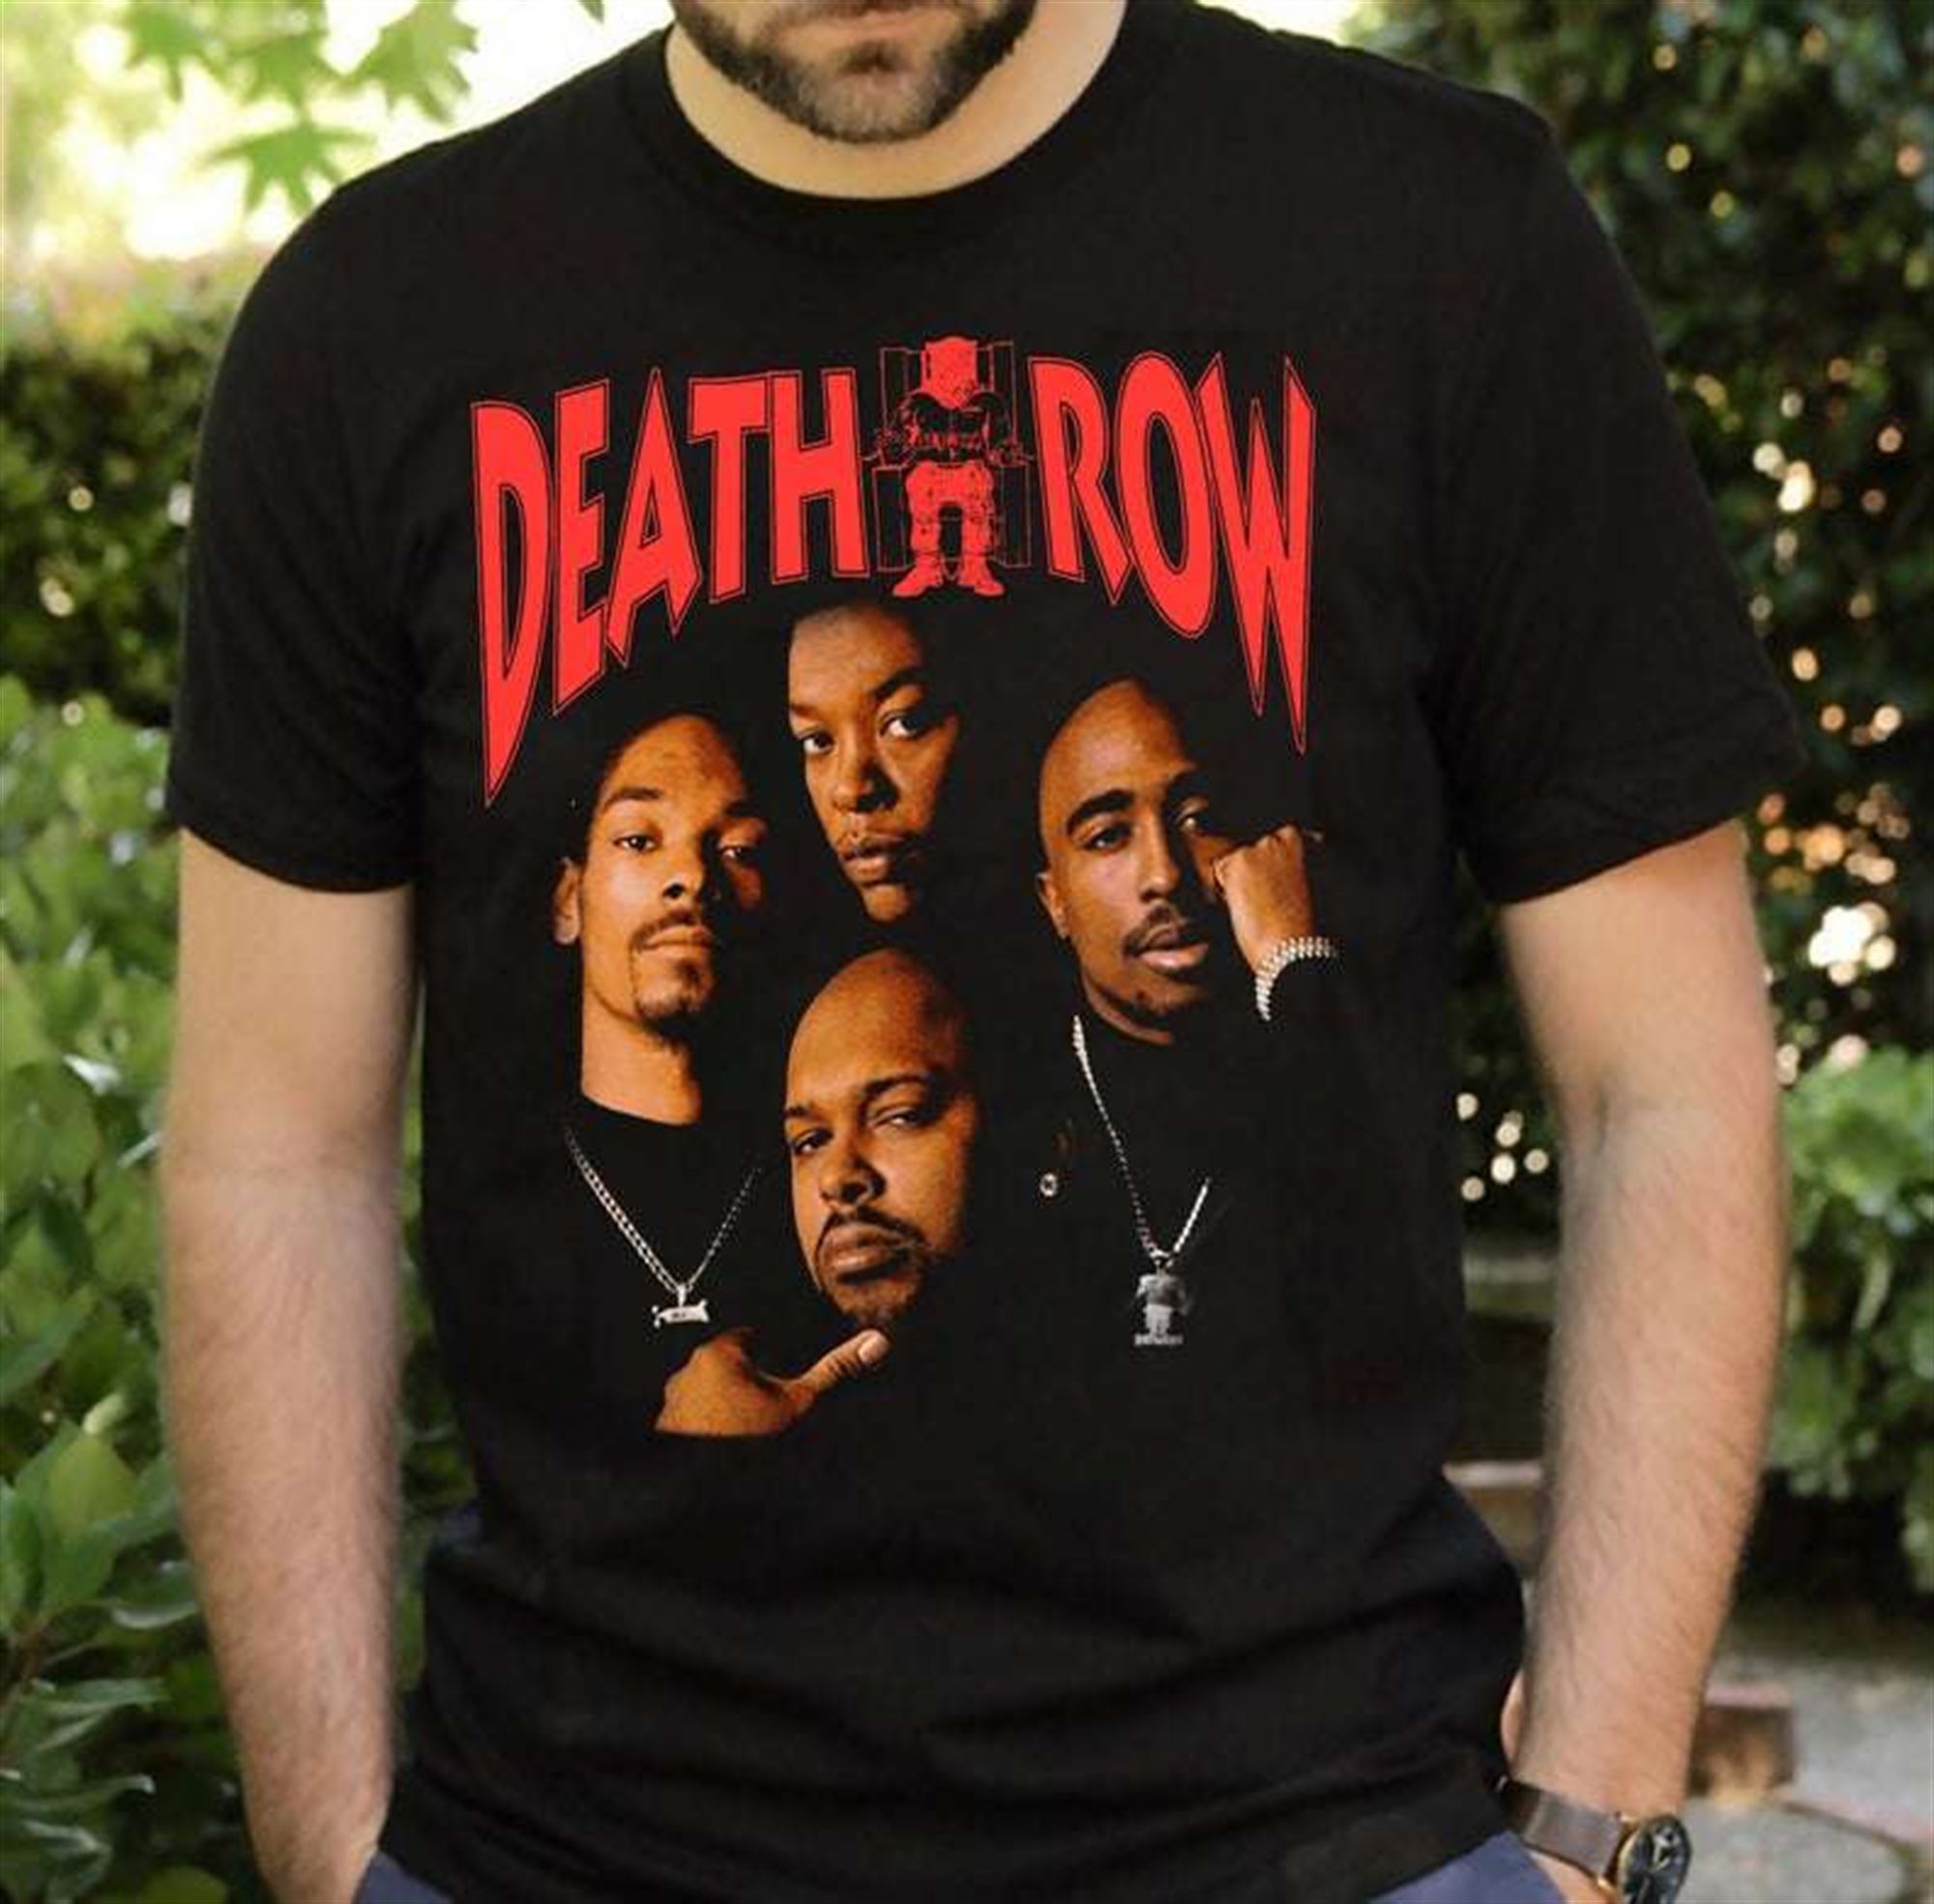 Death Row Records Vintage Classic Unisex T Shirt Full Size Up To 5xl